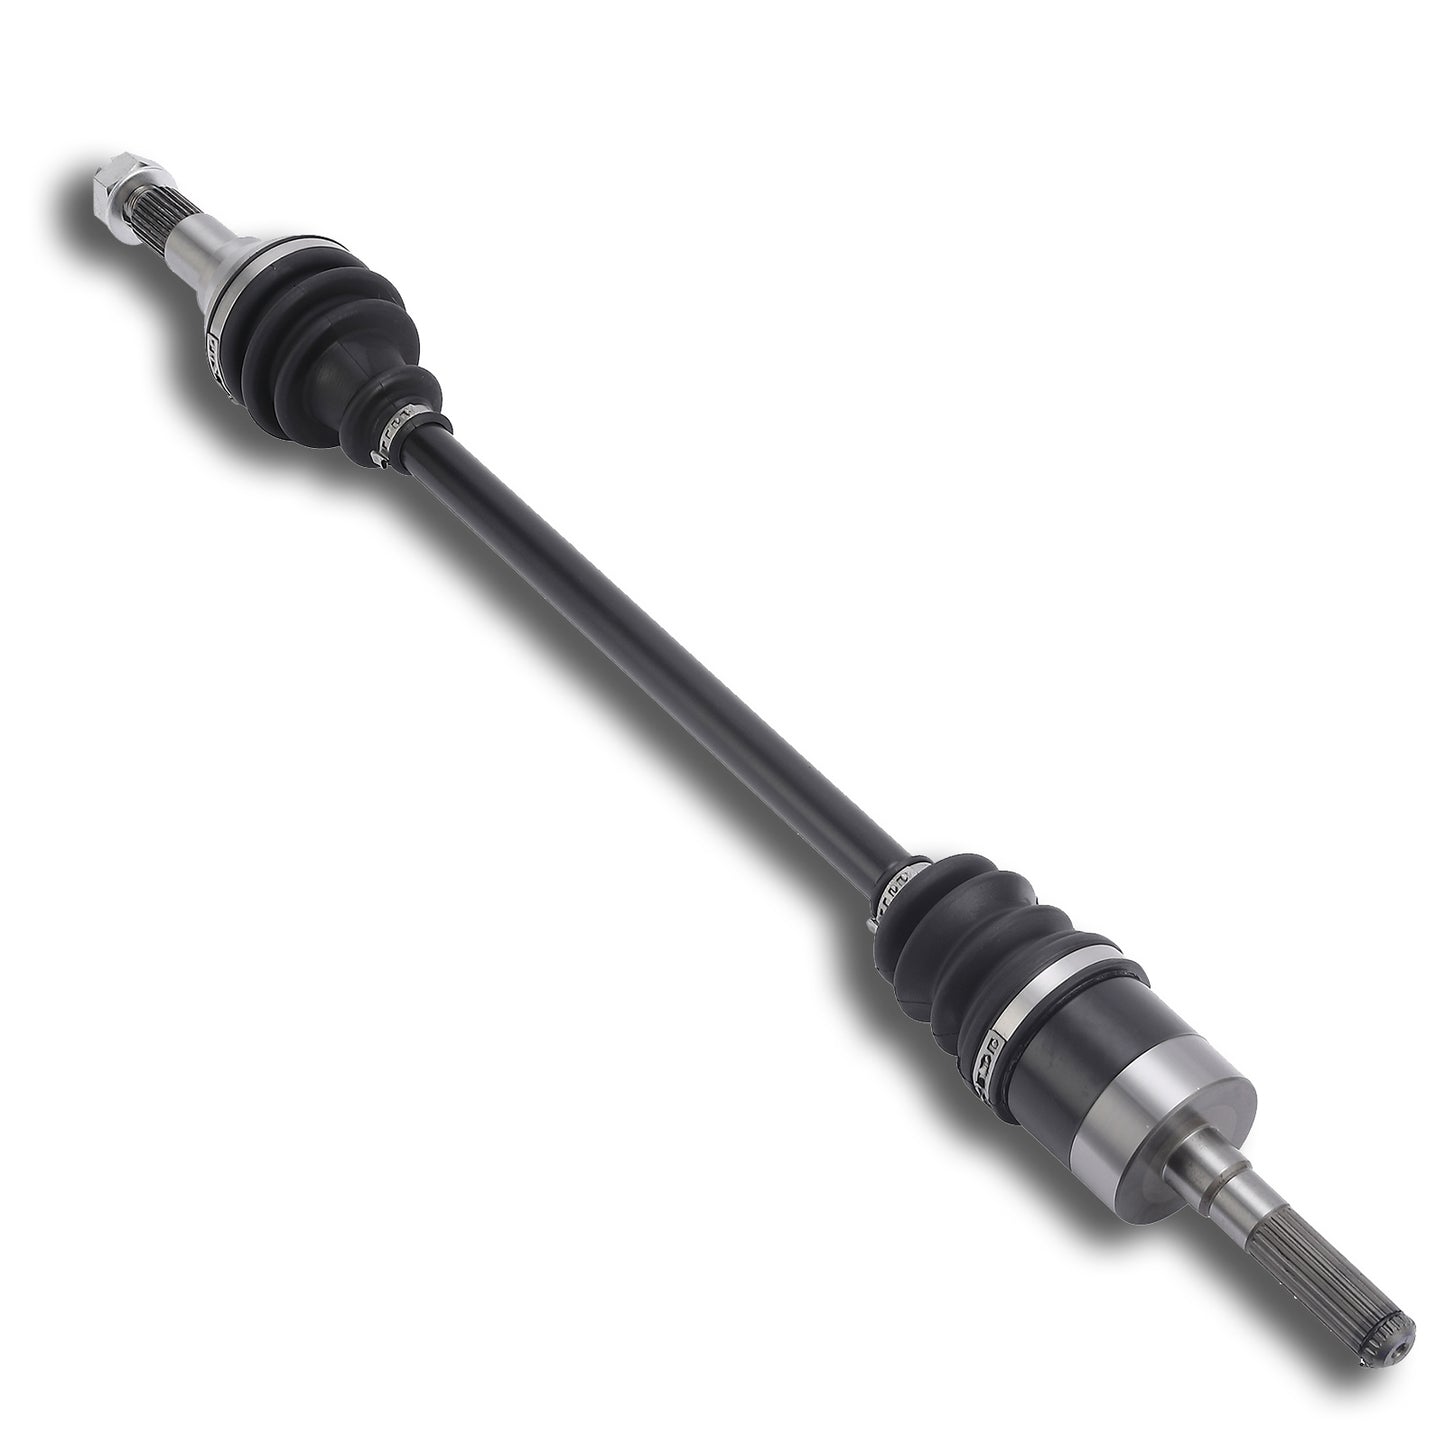 CAM-CA217 Front Right Drive Shaft CV Axle for CAN AM (2014-2018) Maverick 1000 (Exc. X, XC, XMR, XXC) RF 705401236,705401874